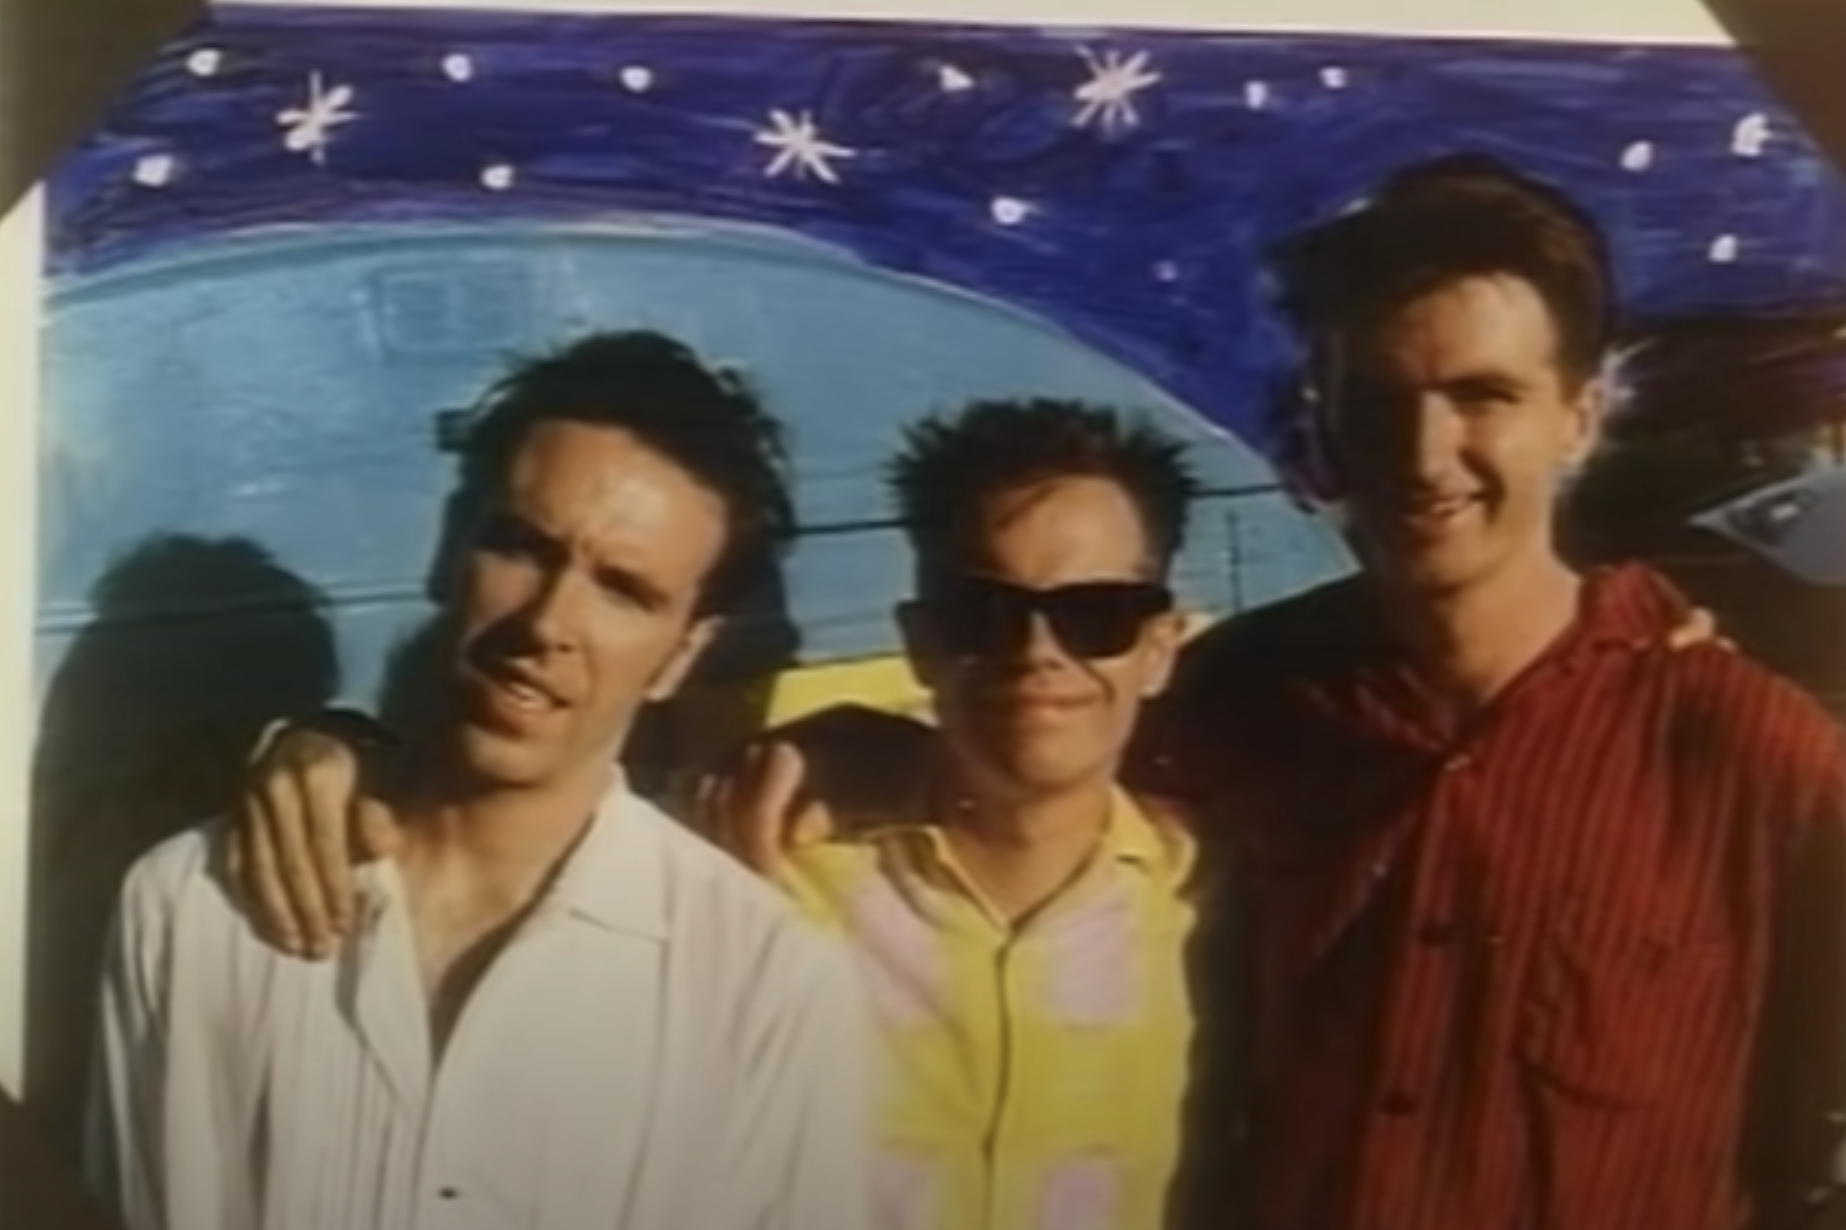 Group pic of band Crowded House